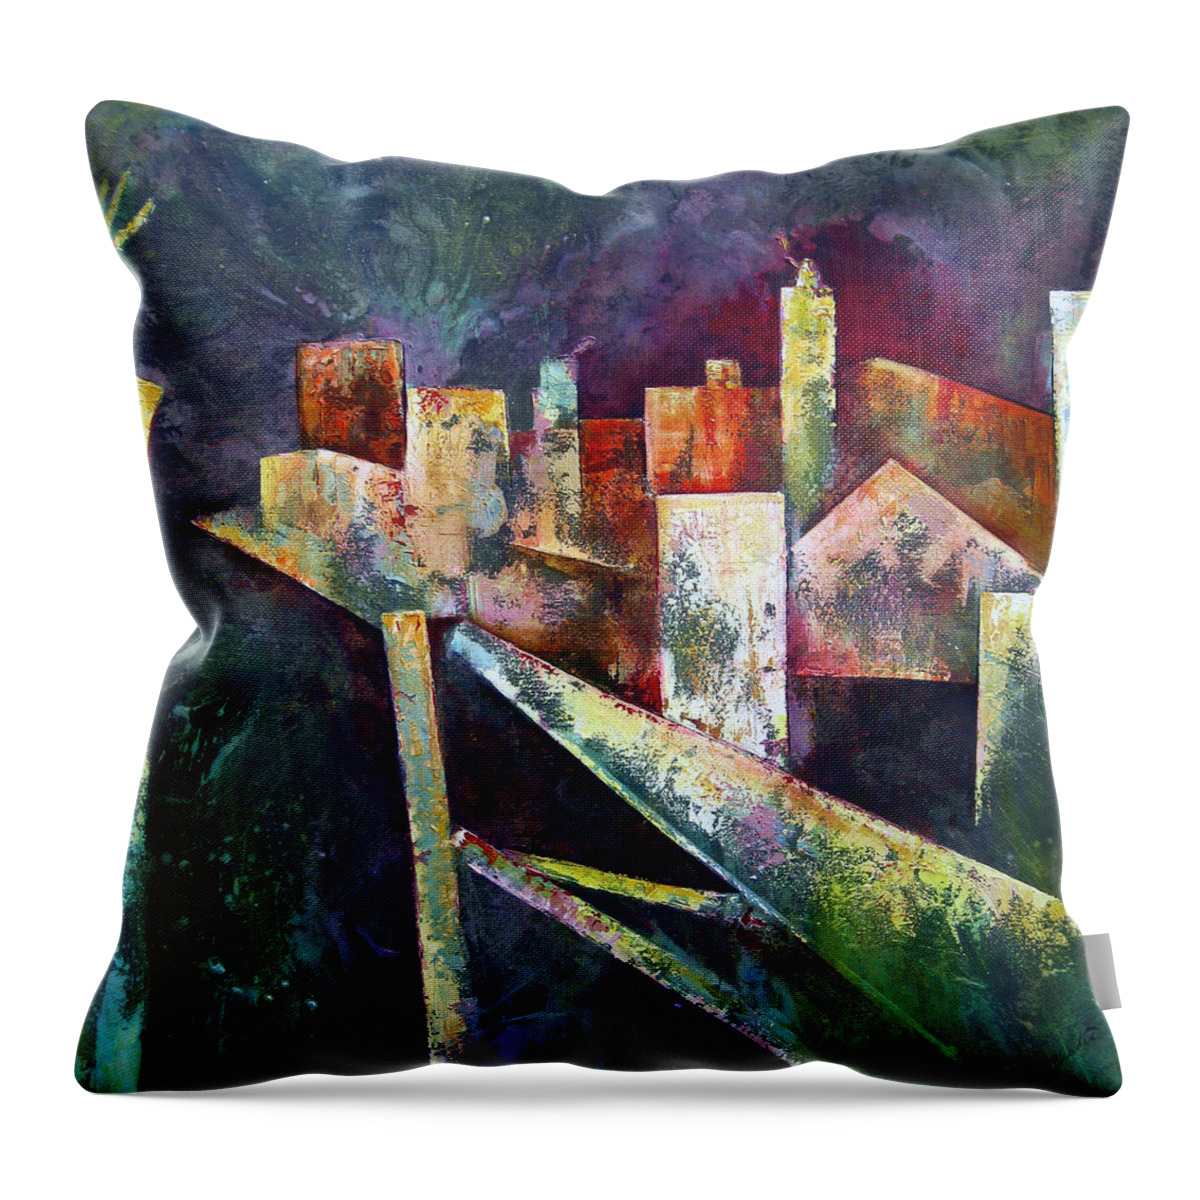 Abstract Paintings Throw Pillow featuring the painting Studio by Shadia Derbyshire